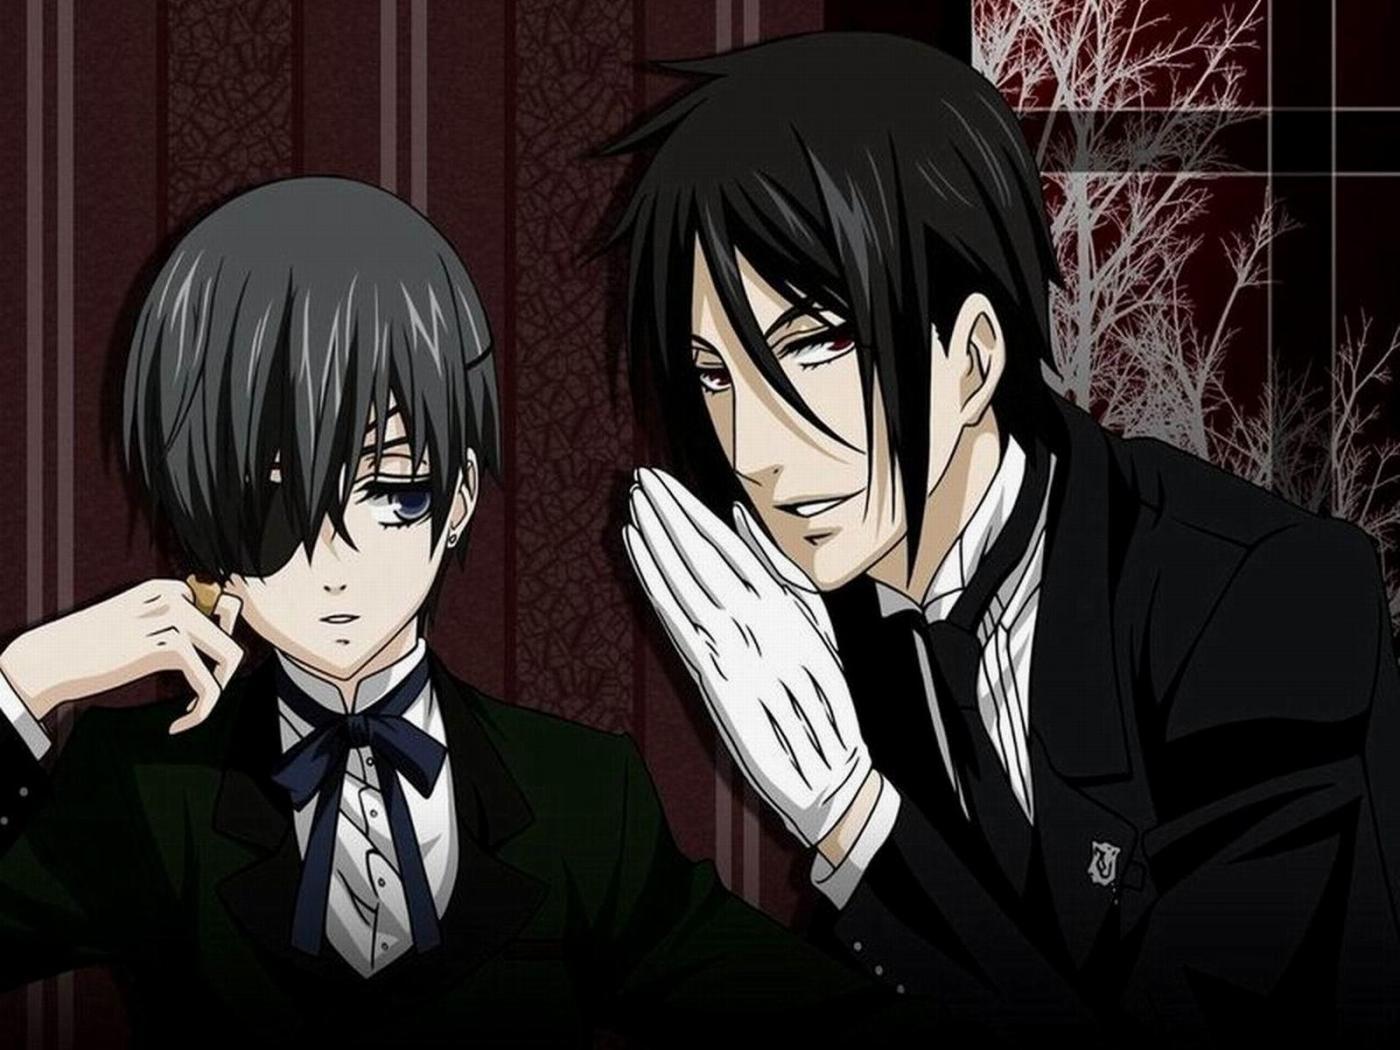 New Black Butler anime in the works!